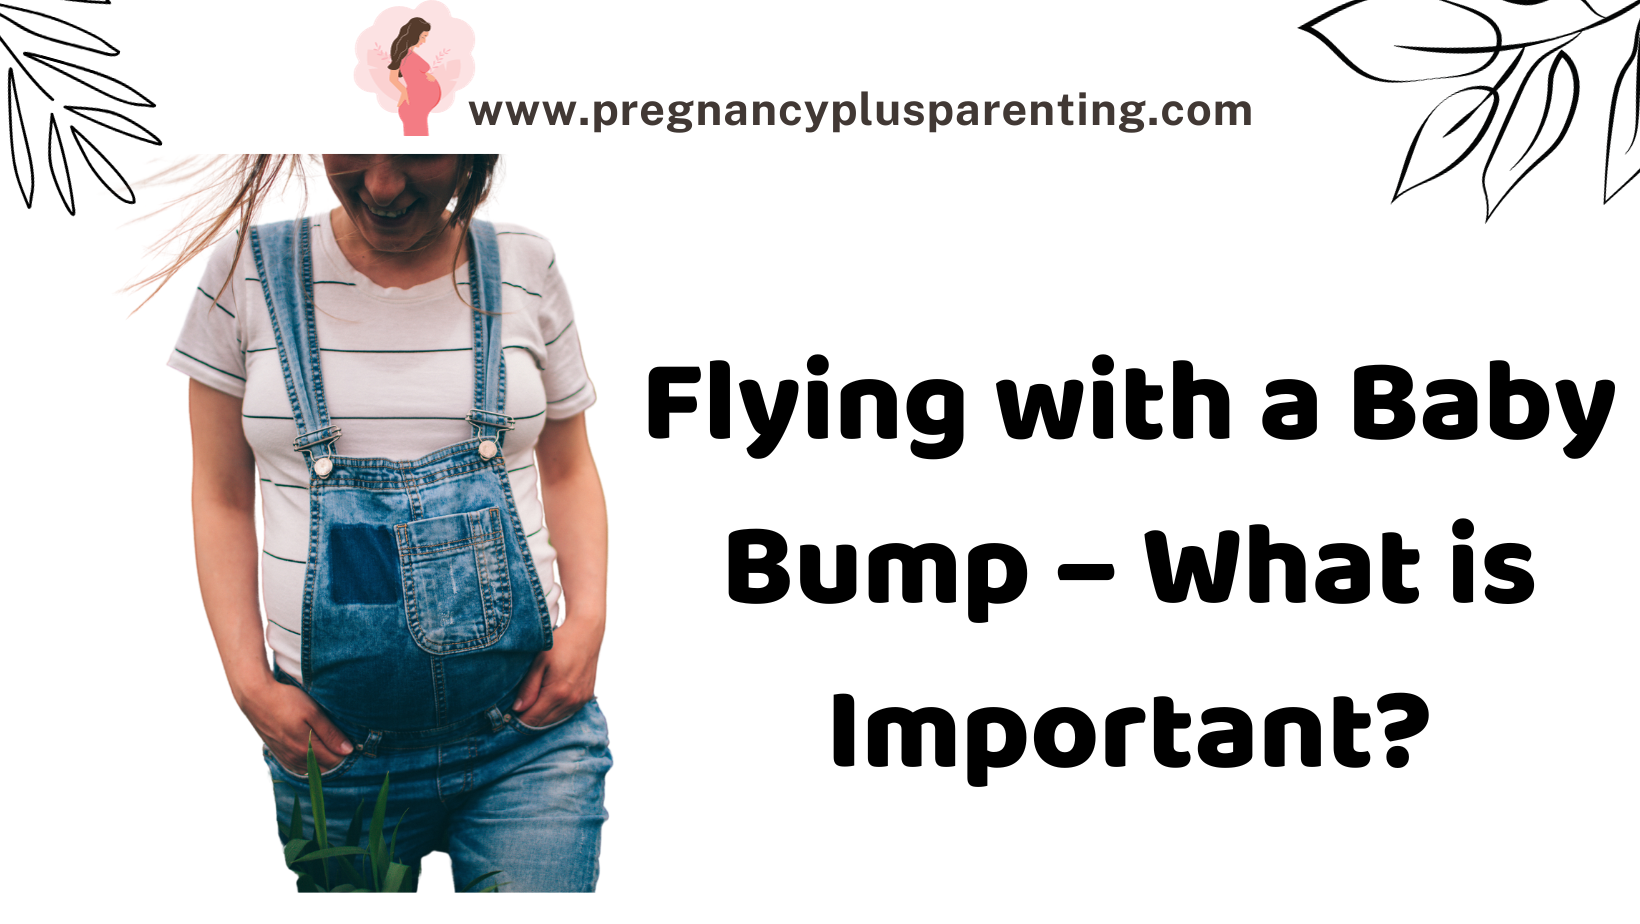 Flying with a Baby Bump – What is Important?